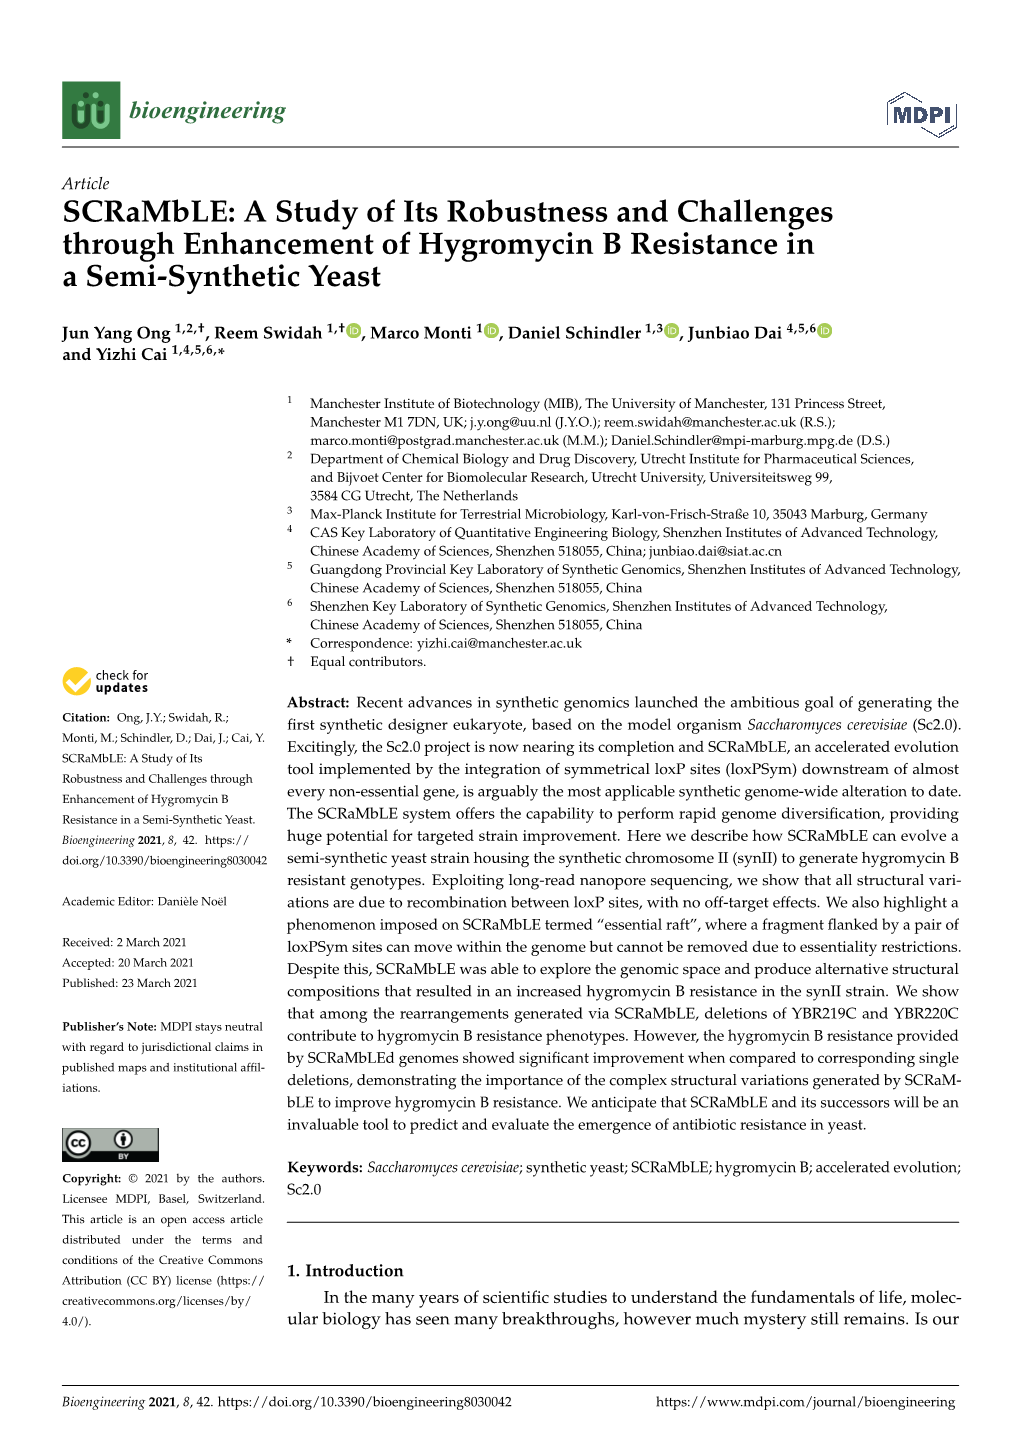 Scramble: a Study of Its Robustness and Challenges Through Enhancement of Hygromycin B Resistance in a Semi-Synthetic Yeast